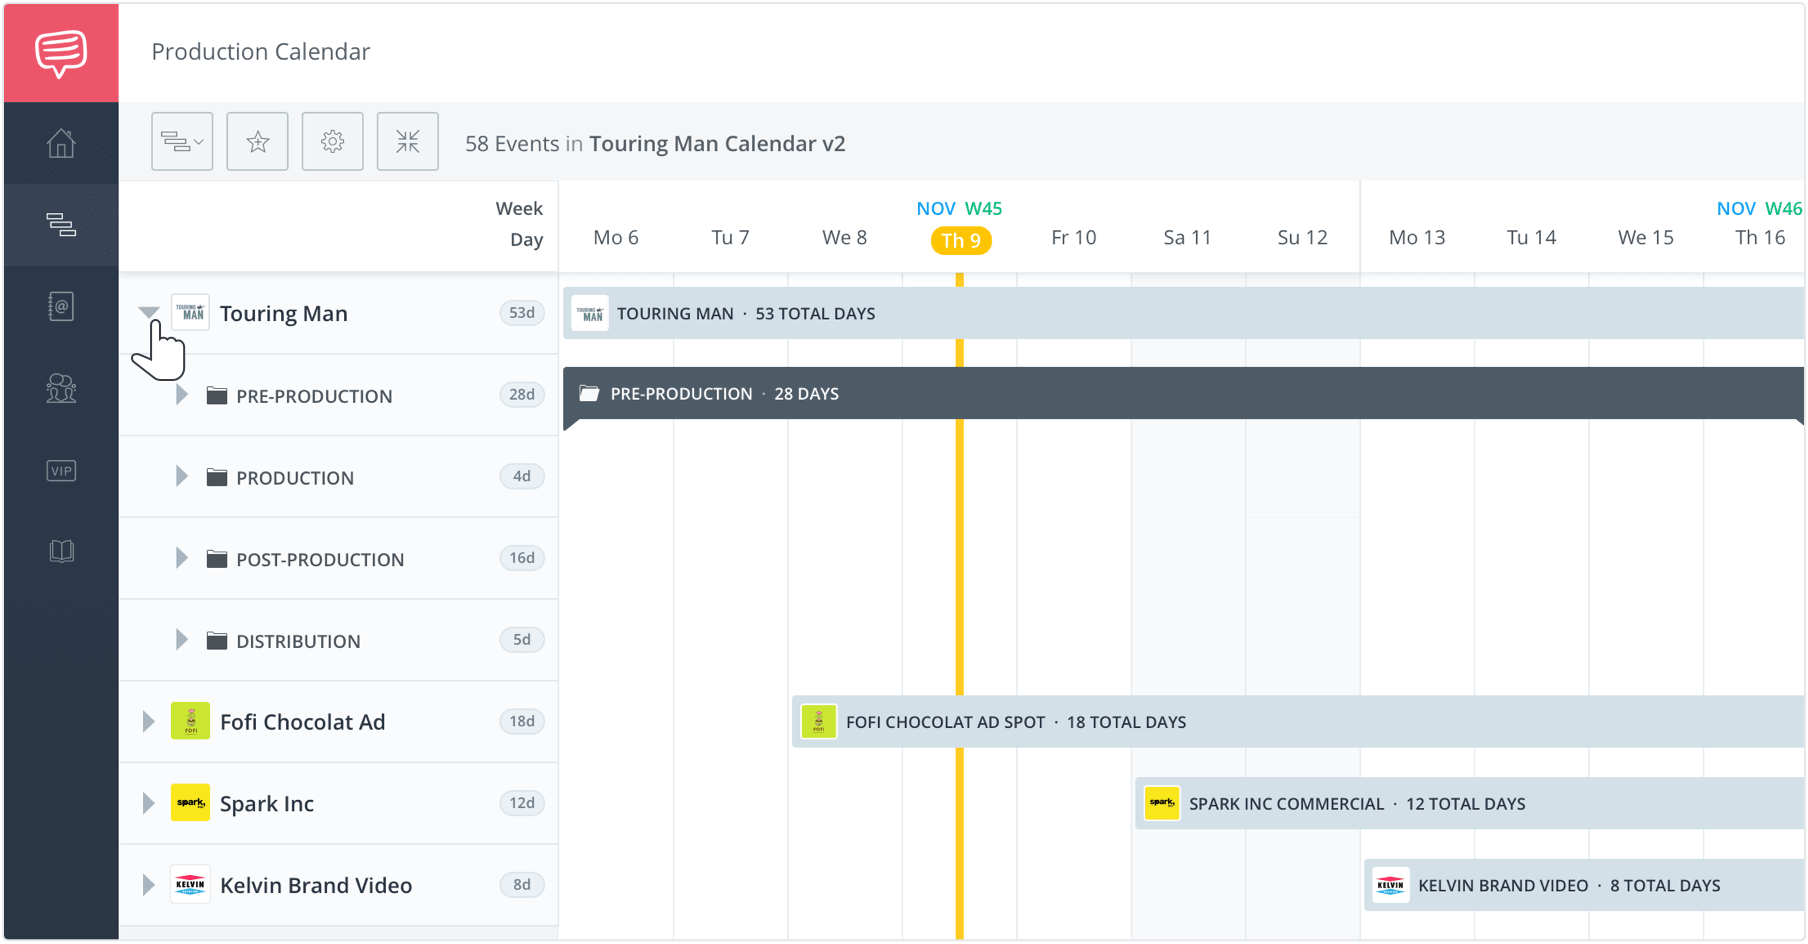 Film TV and Video Production Calendar - View Multiple Calendars on Single Page - StudioBinder Production Management Software